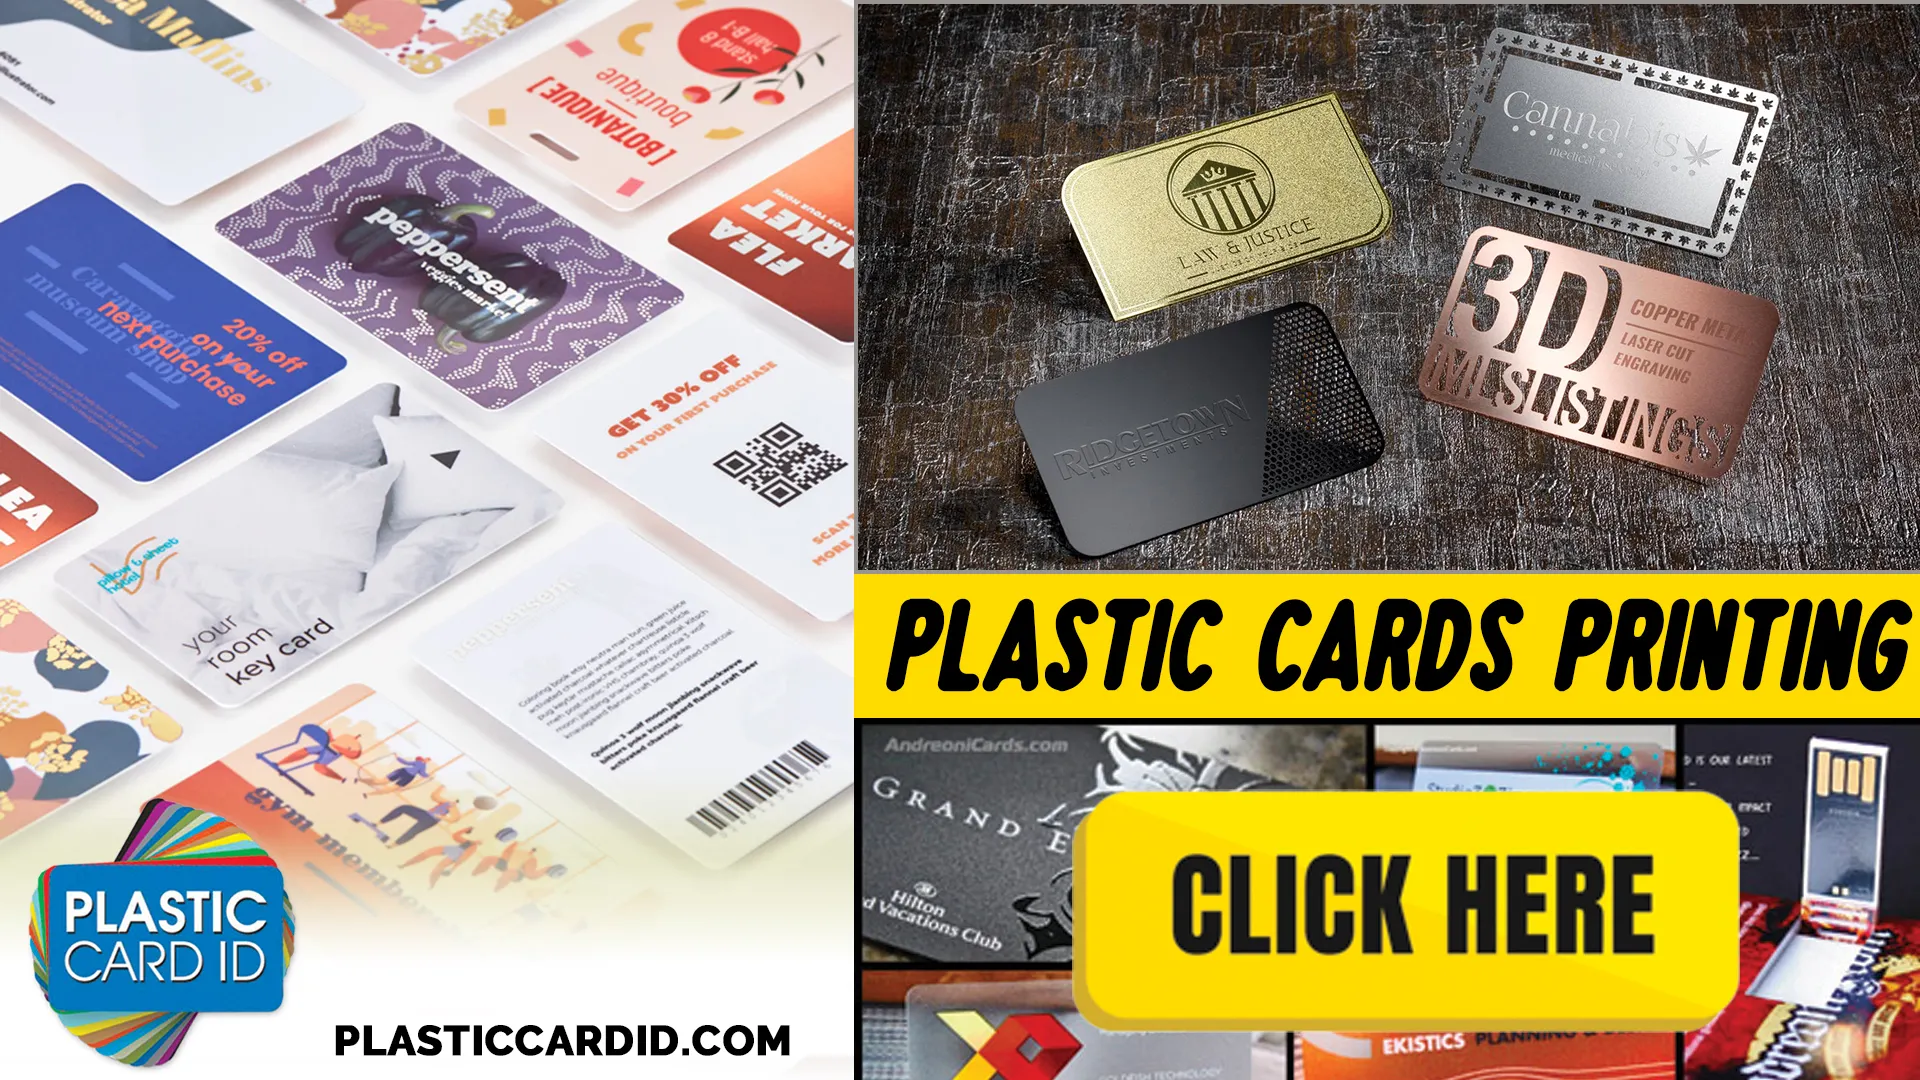 Welcome to Plastic Card ID




: Where Card Quality Meets Brand Strength